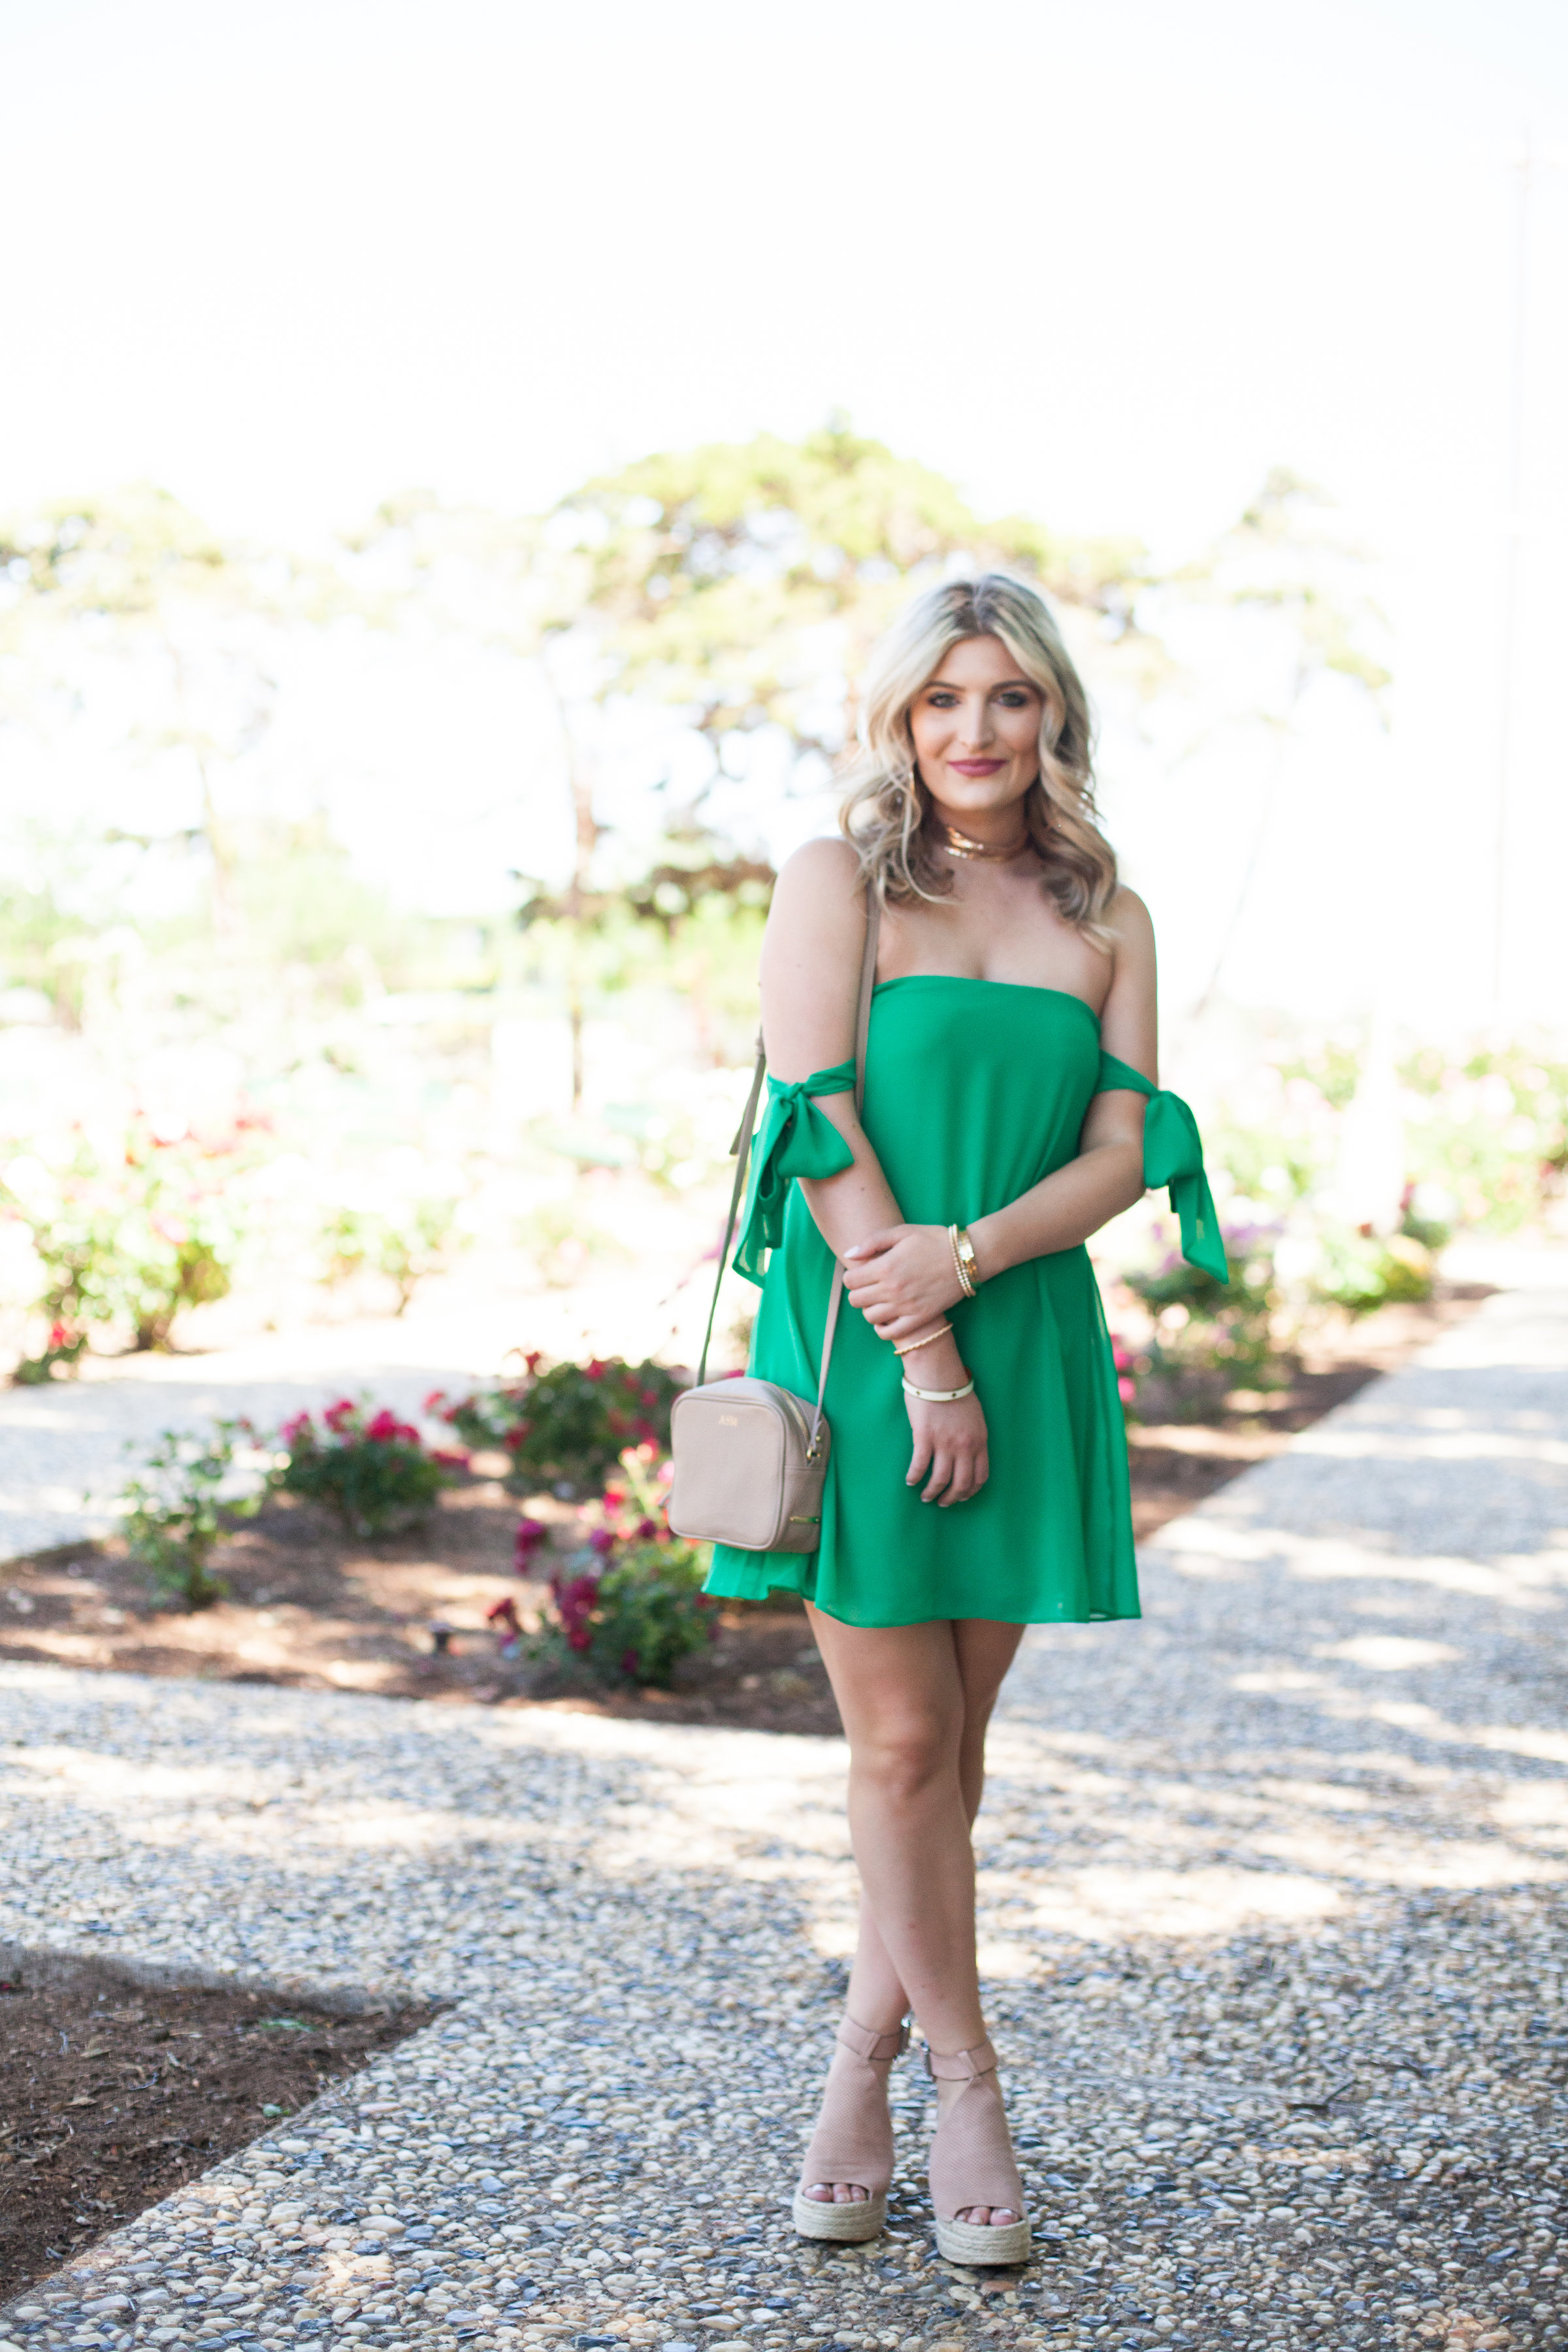 Girl in the Green Dress | Fashion and lifestyle blogger | Hot color for Summer | Asos | Audrey Madison Stowe Blog - Green Cold Shoulder Dress styled by popular Texas fashion blogger, Audrey Madison Stowe